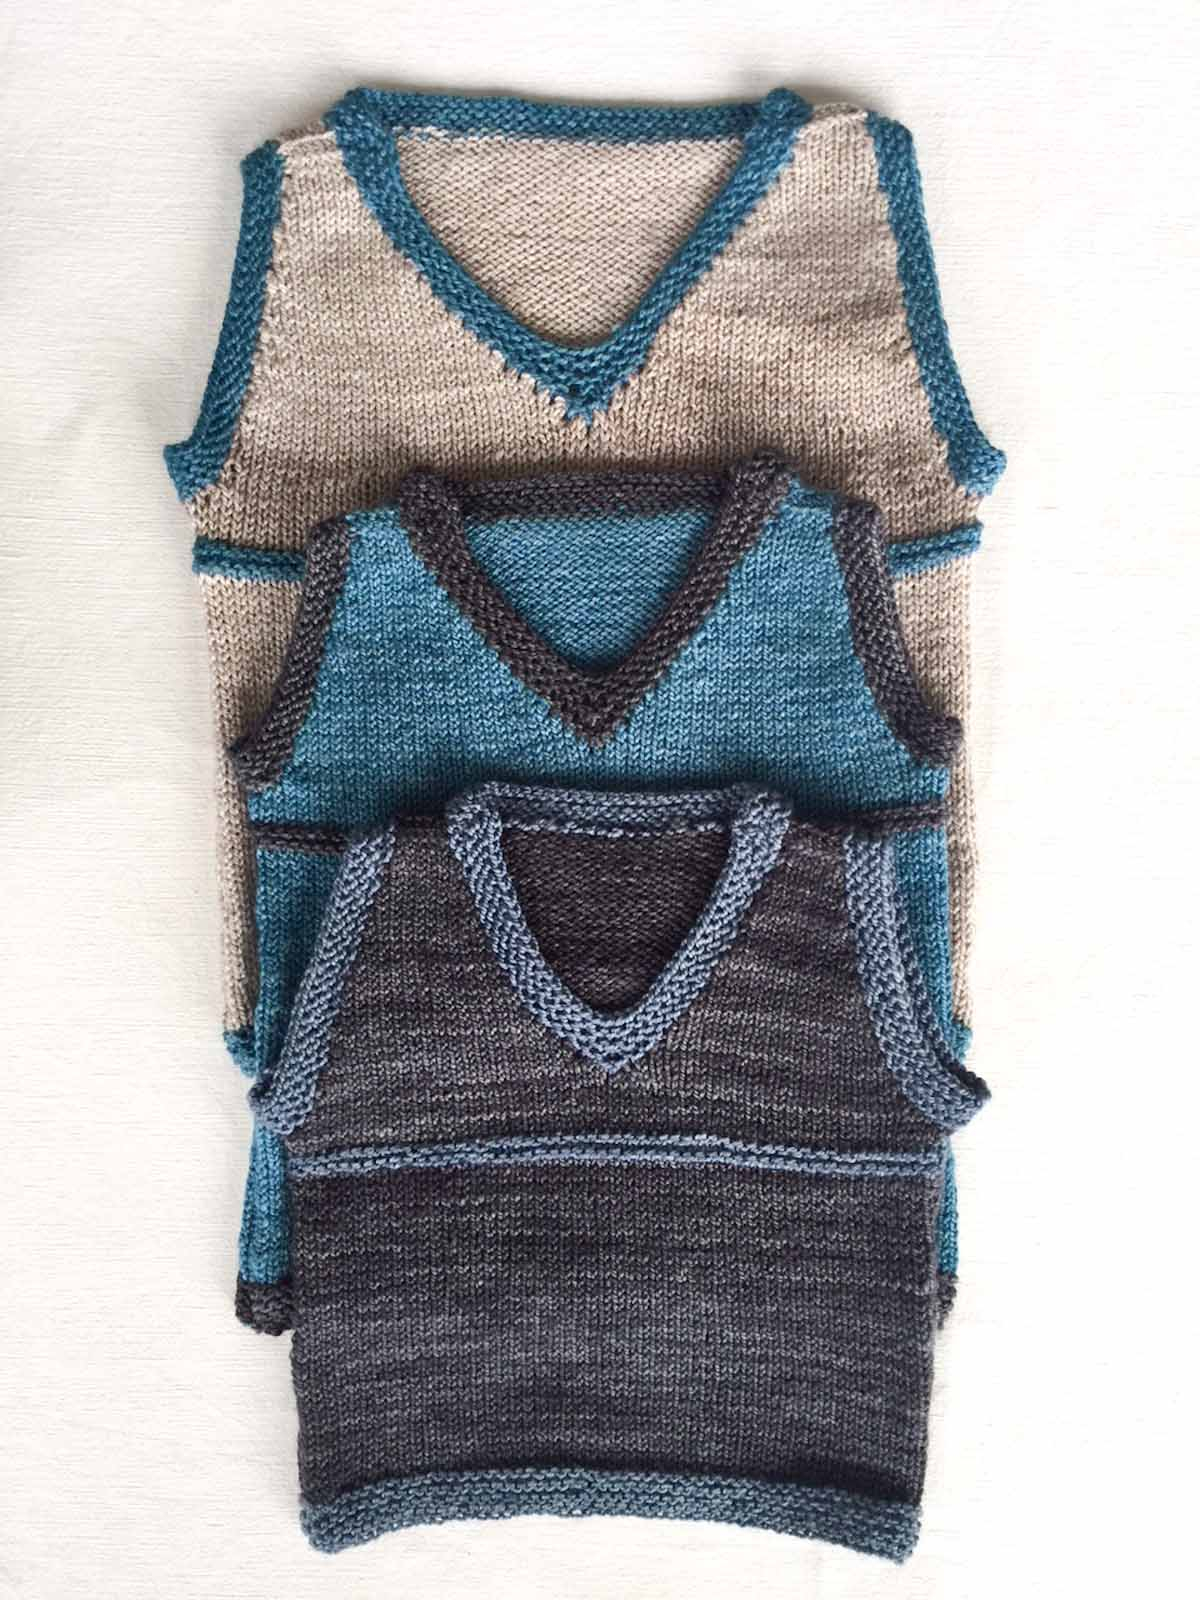 Free Knitting Patterns For Boys Cowgirlblues Free Knit Pattern Sleeveless Vest Boys Cowgirlblues